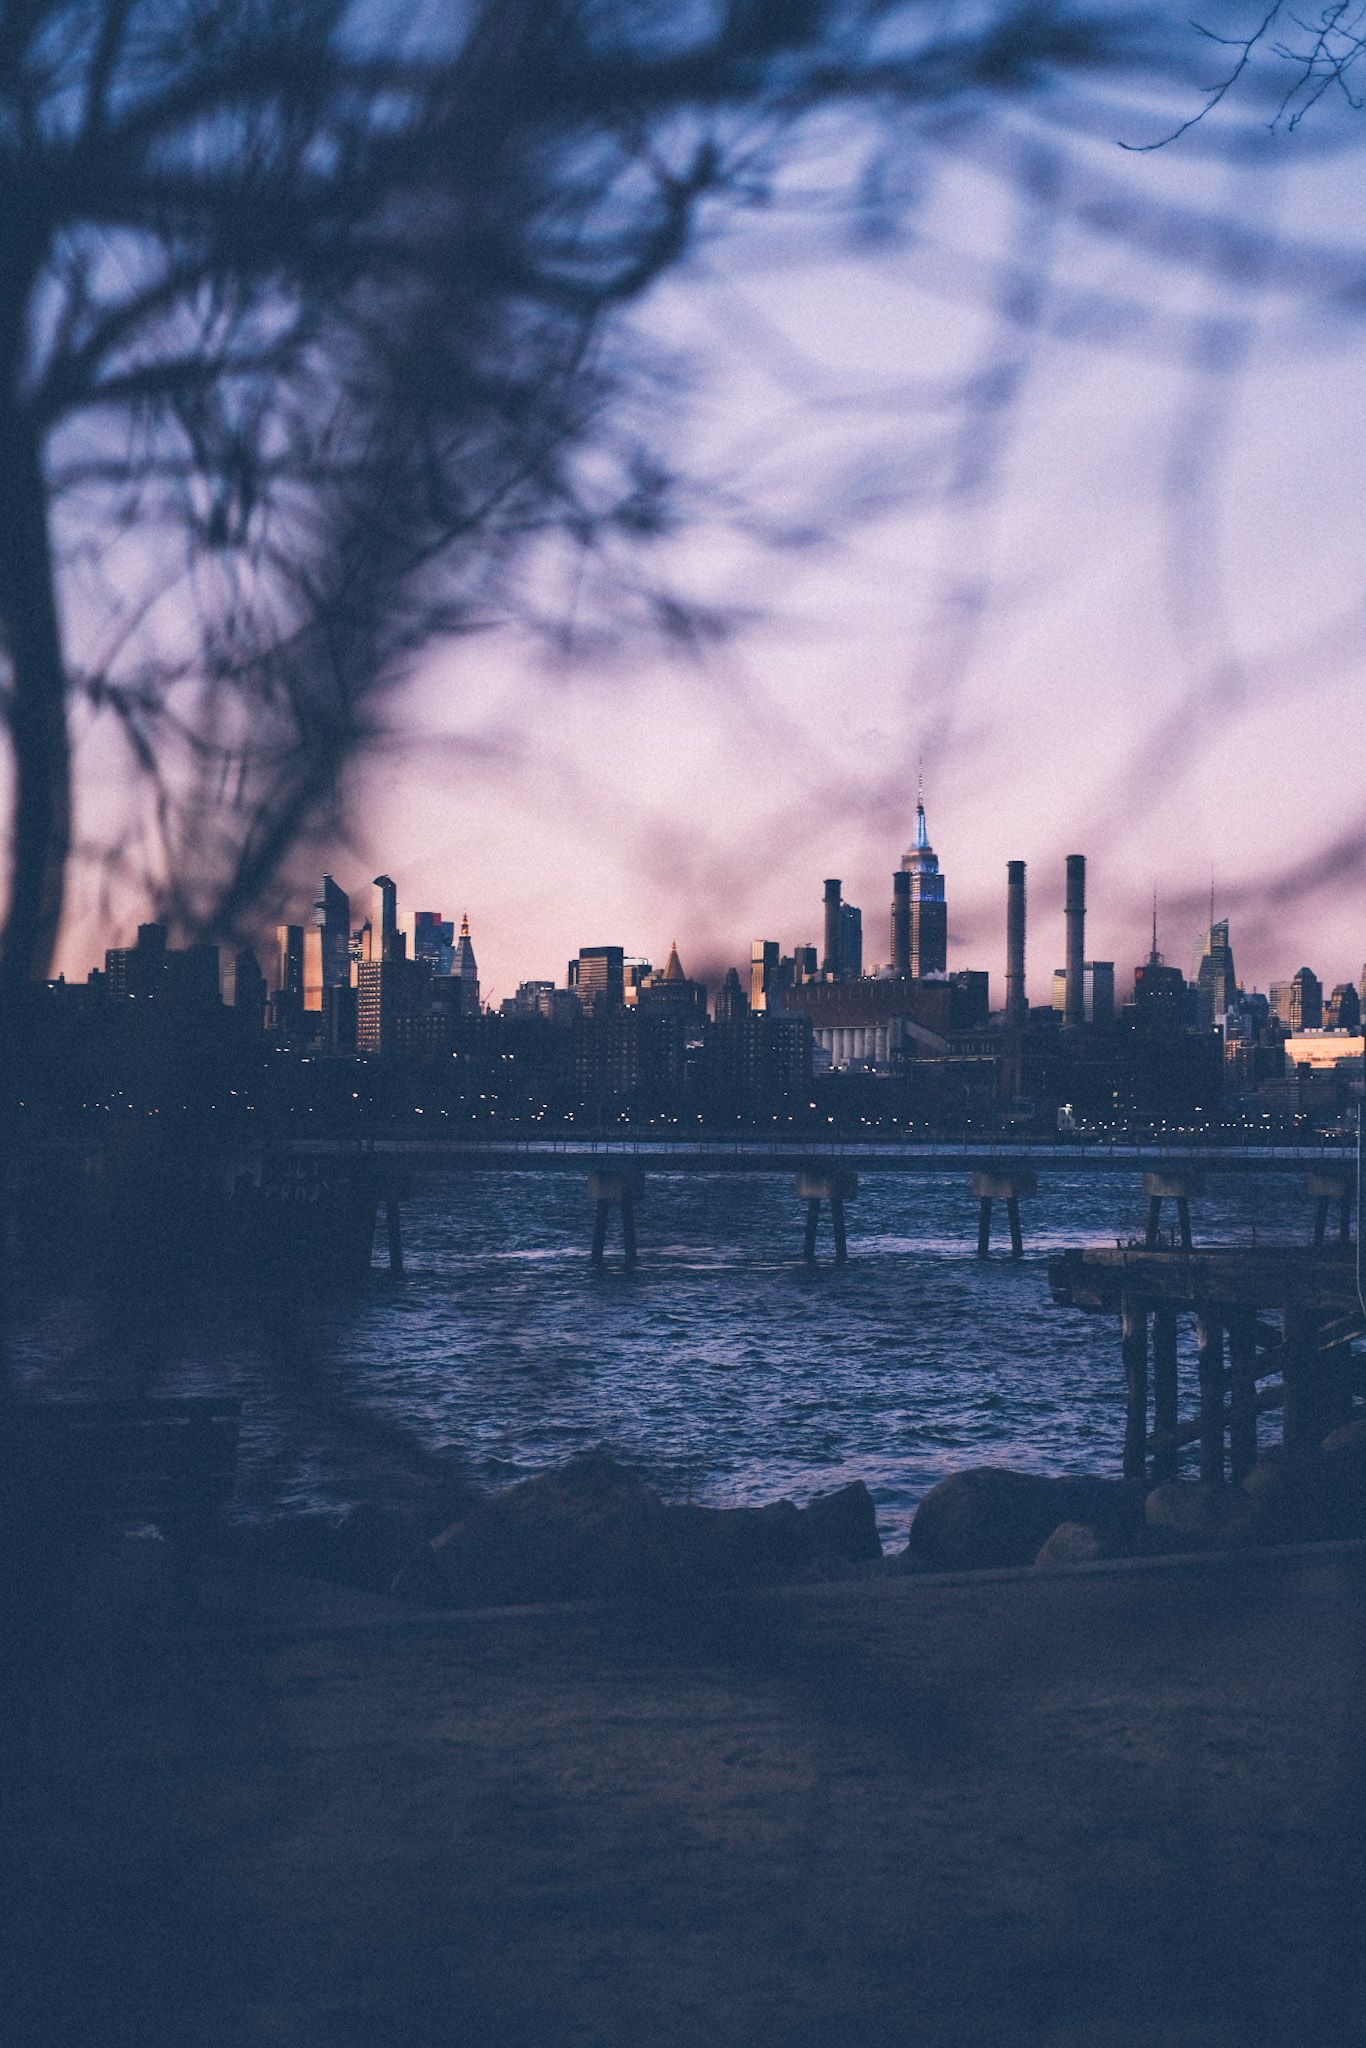 A view of the upper Manhattan skyline peeks through thin tree branches at sunset, divided by piers on the East River.